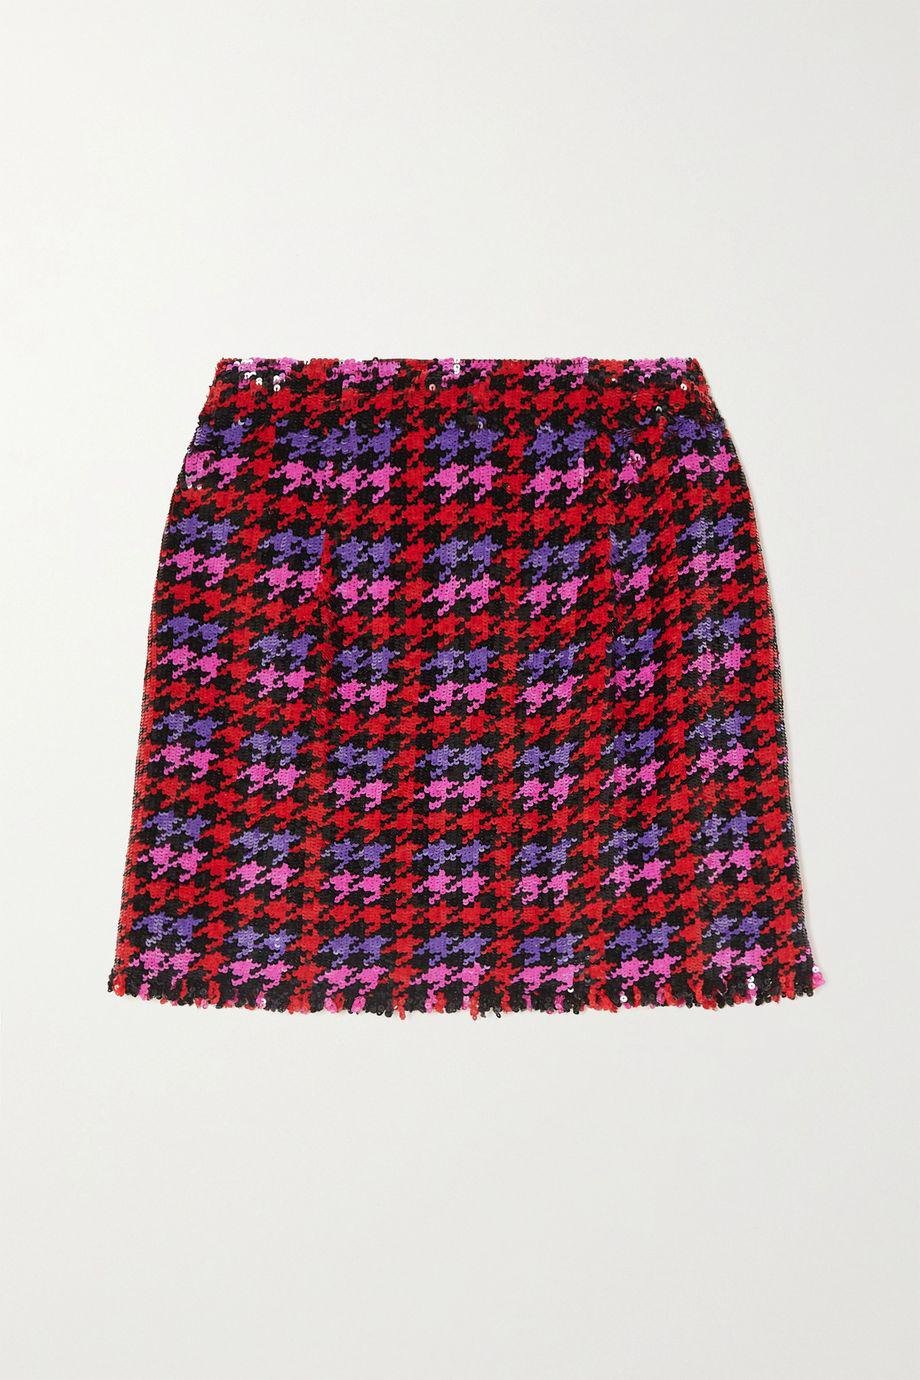 Houndstooth sequined georgette mini skirt by ASHISH